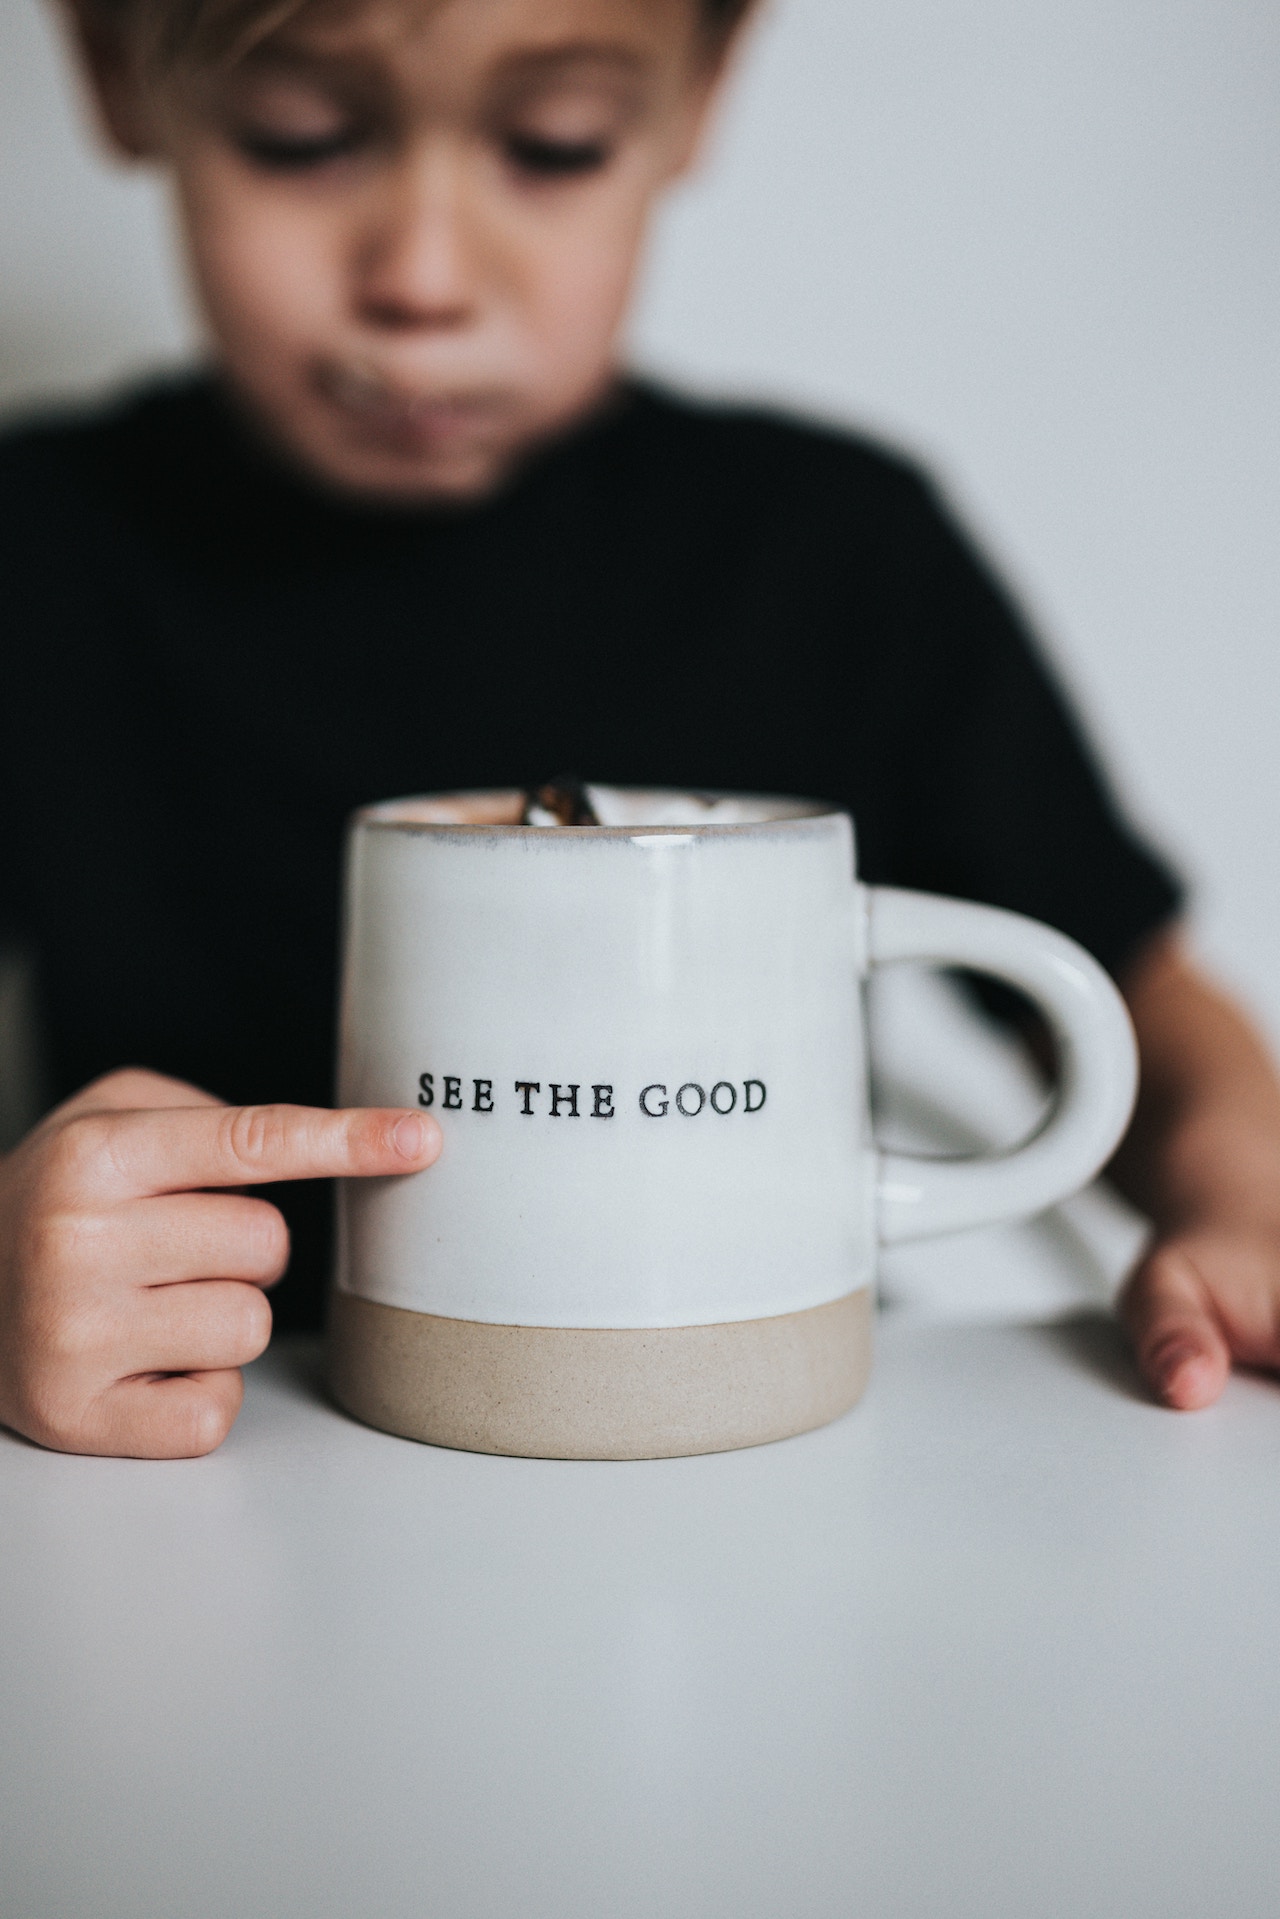 Child pointing at coffee mug that has text "See the Good"